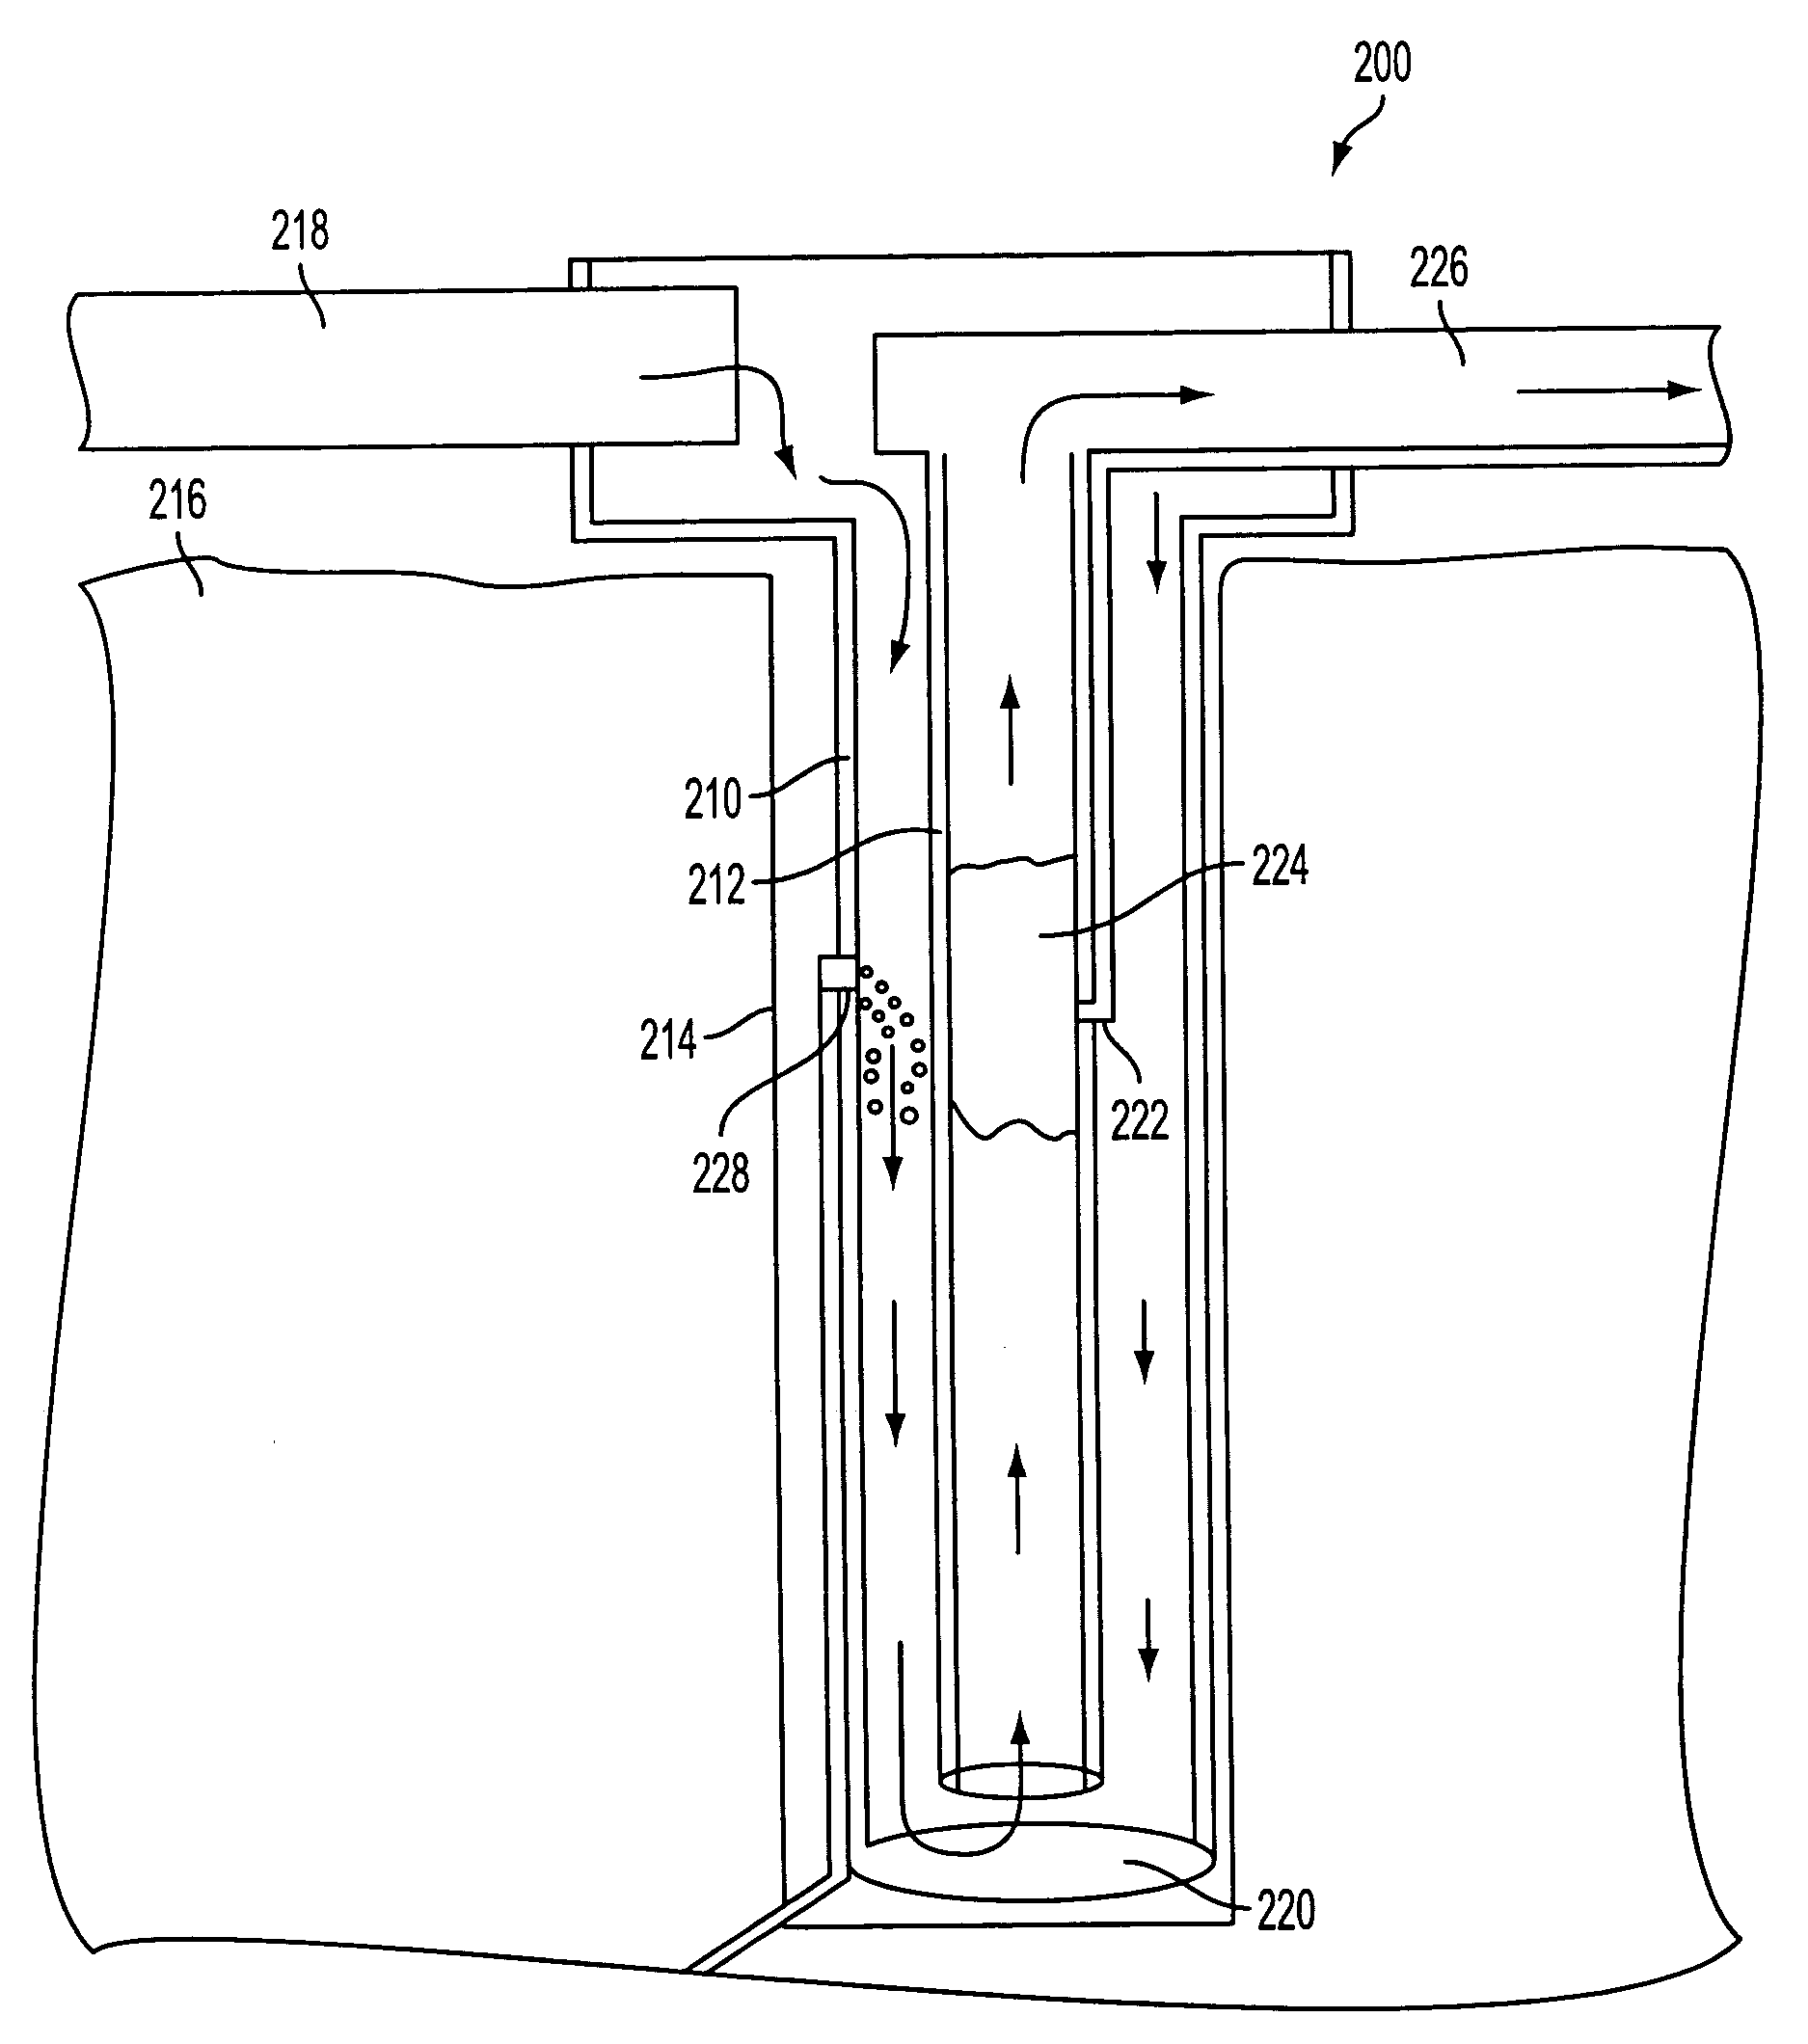 Method and system for removal of contaminants from aqueous solution